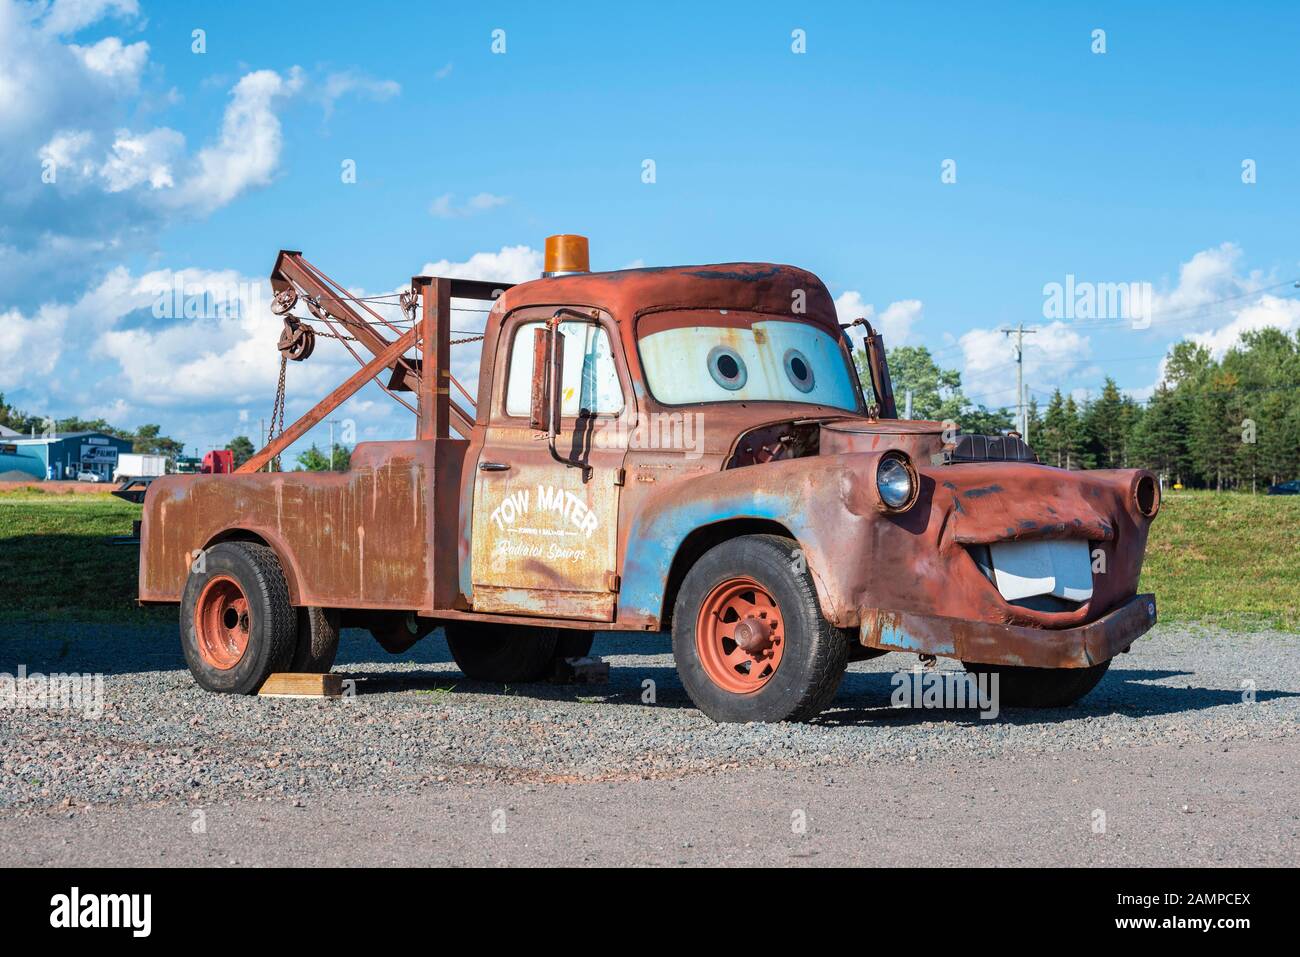 Reproduction of the comic figure Hook or Mater from the animated film Cars,  Prince Edward Island, Canada Stock Photo - Alamy